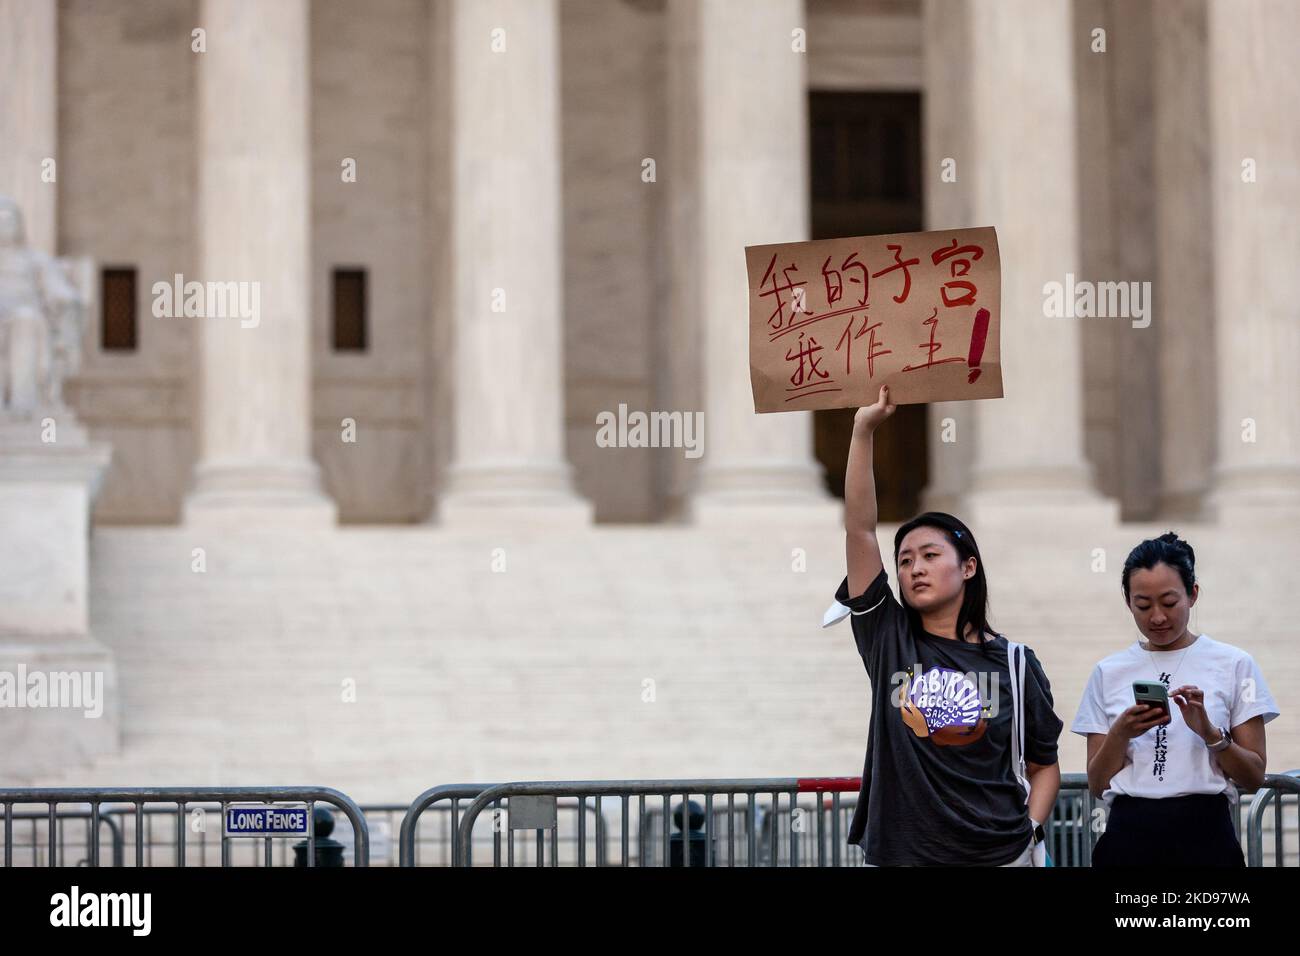 Zhangzhu, a stundet at George Washington University, holds a sign in Chinese that translates as 'my uterus, my choice' in front of the Supreme Court.The rally was prompted by a report that the justices voted to overturn Roe v. Wade in a draft opinion for the Dobbs v. JWHO case. Jackson Women’s Health Organization is challenging Mississippi’s ban on abortion after 15 weeks, prior to fetal viability, which has been the standard since the Roe decision. (Photo by Allison Bailey/NurPhoto) Stock Photo